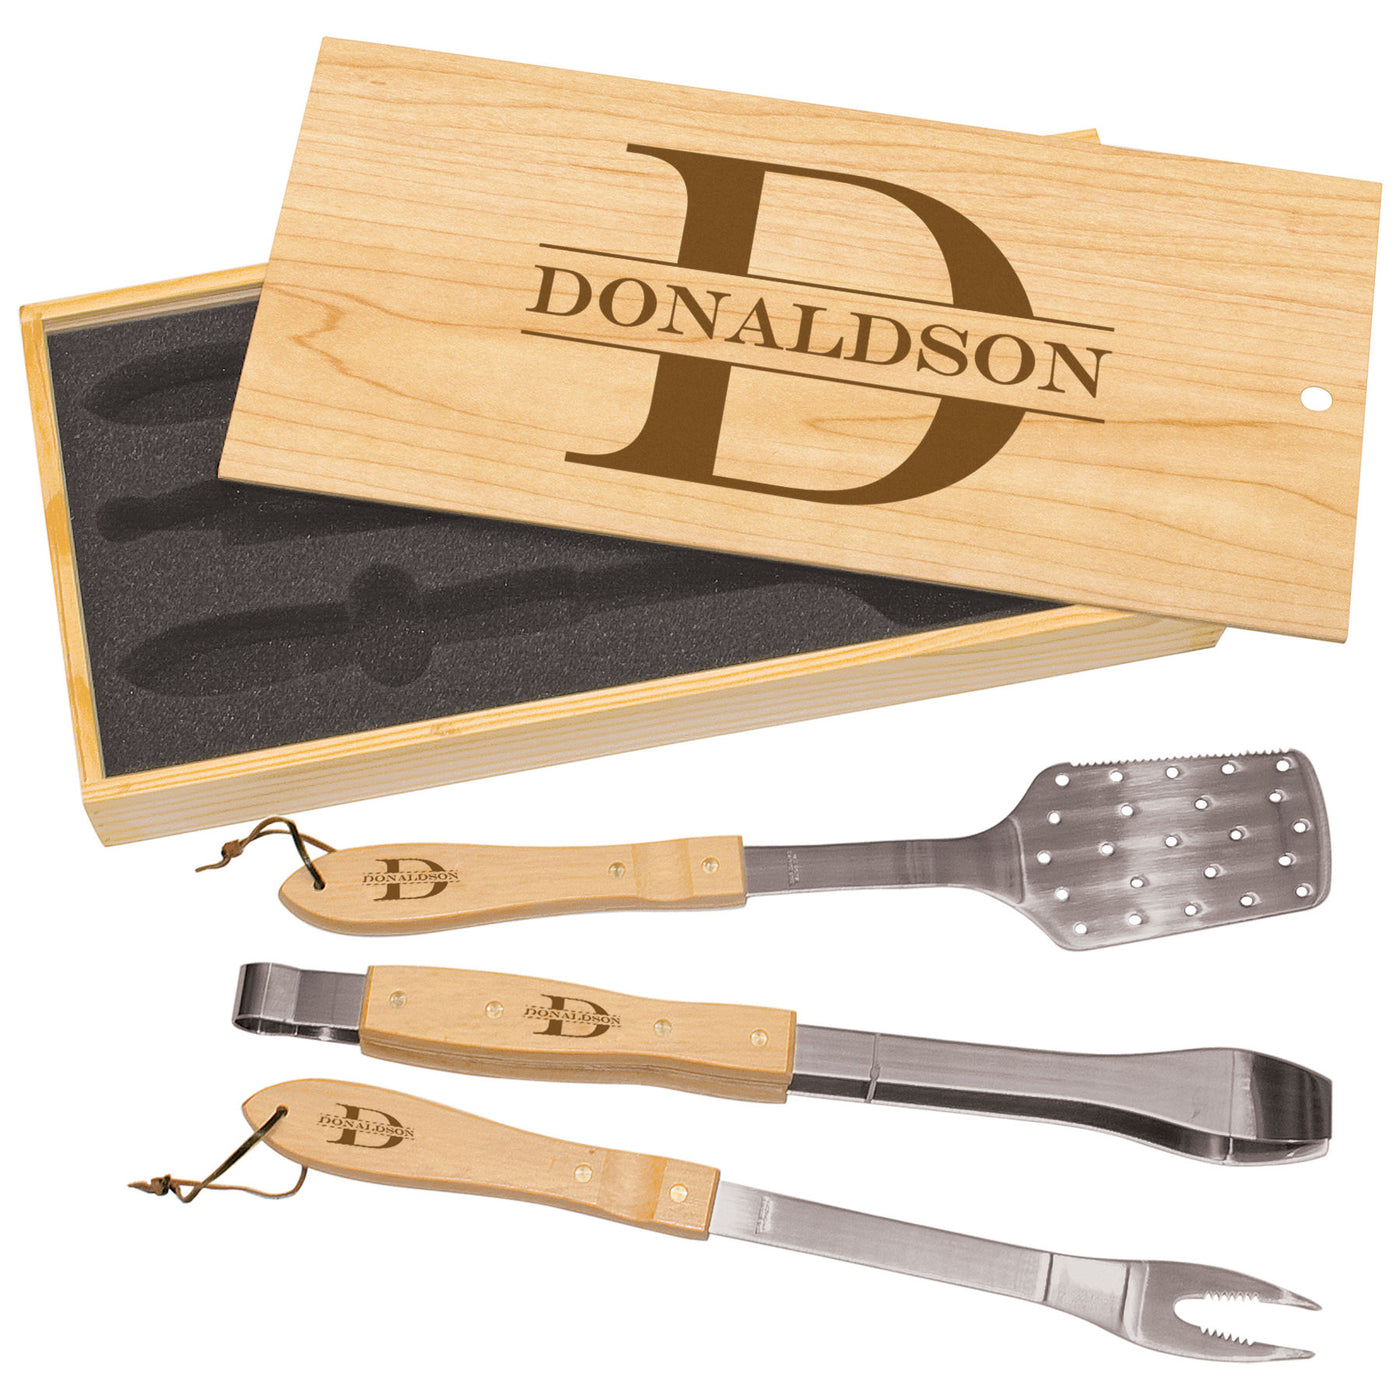 3-Piece BBQ Grill Set in Wooden Pine Box